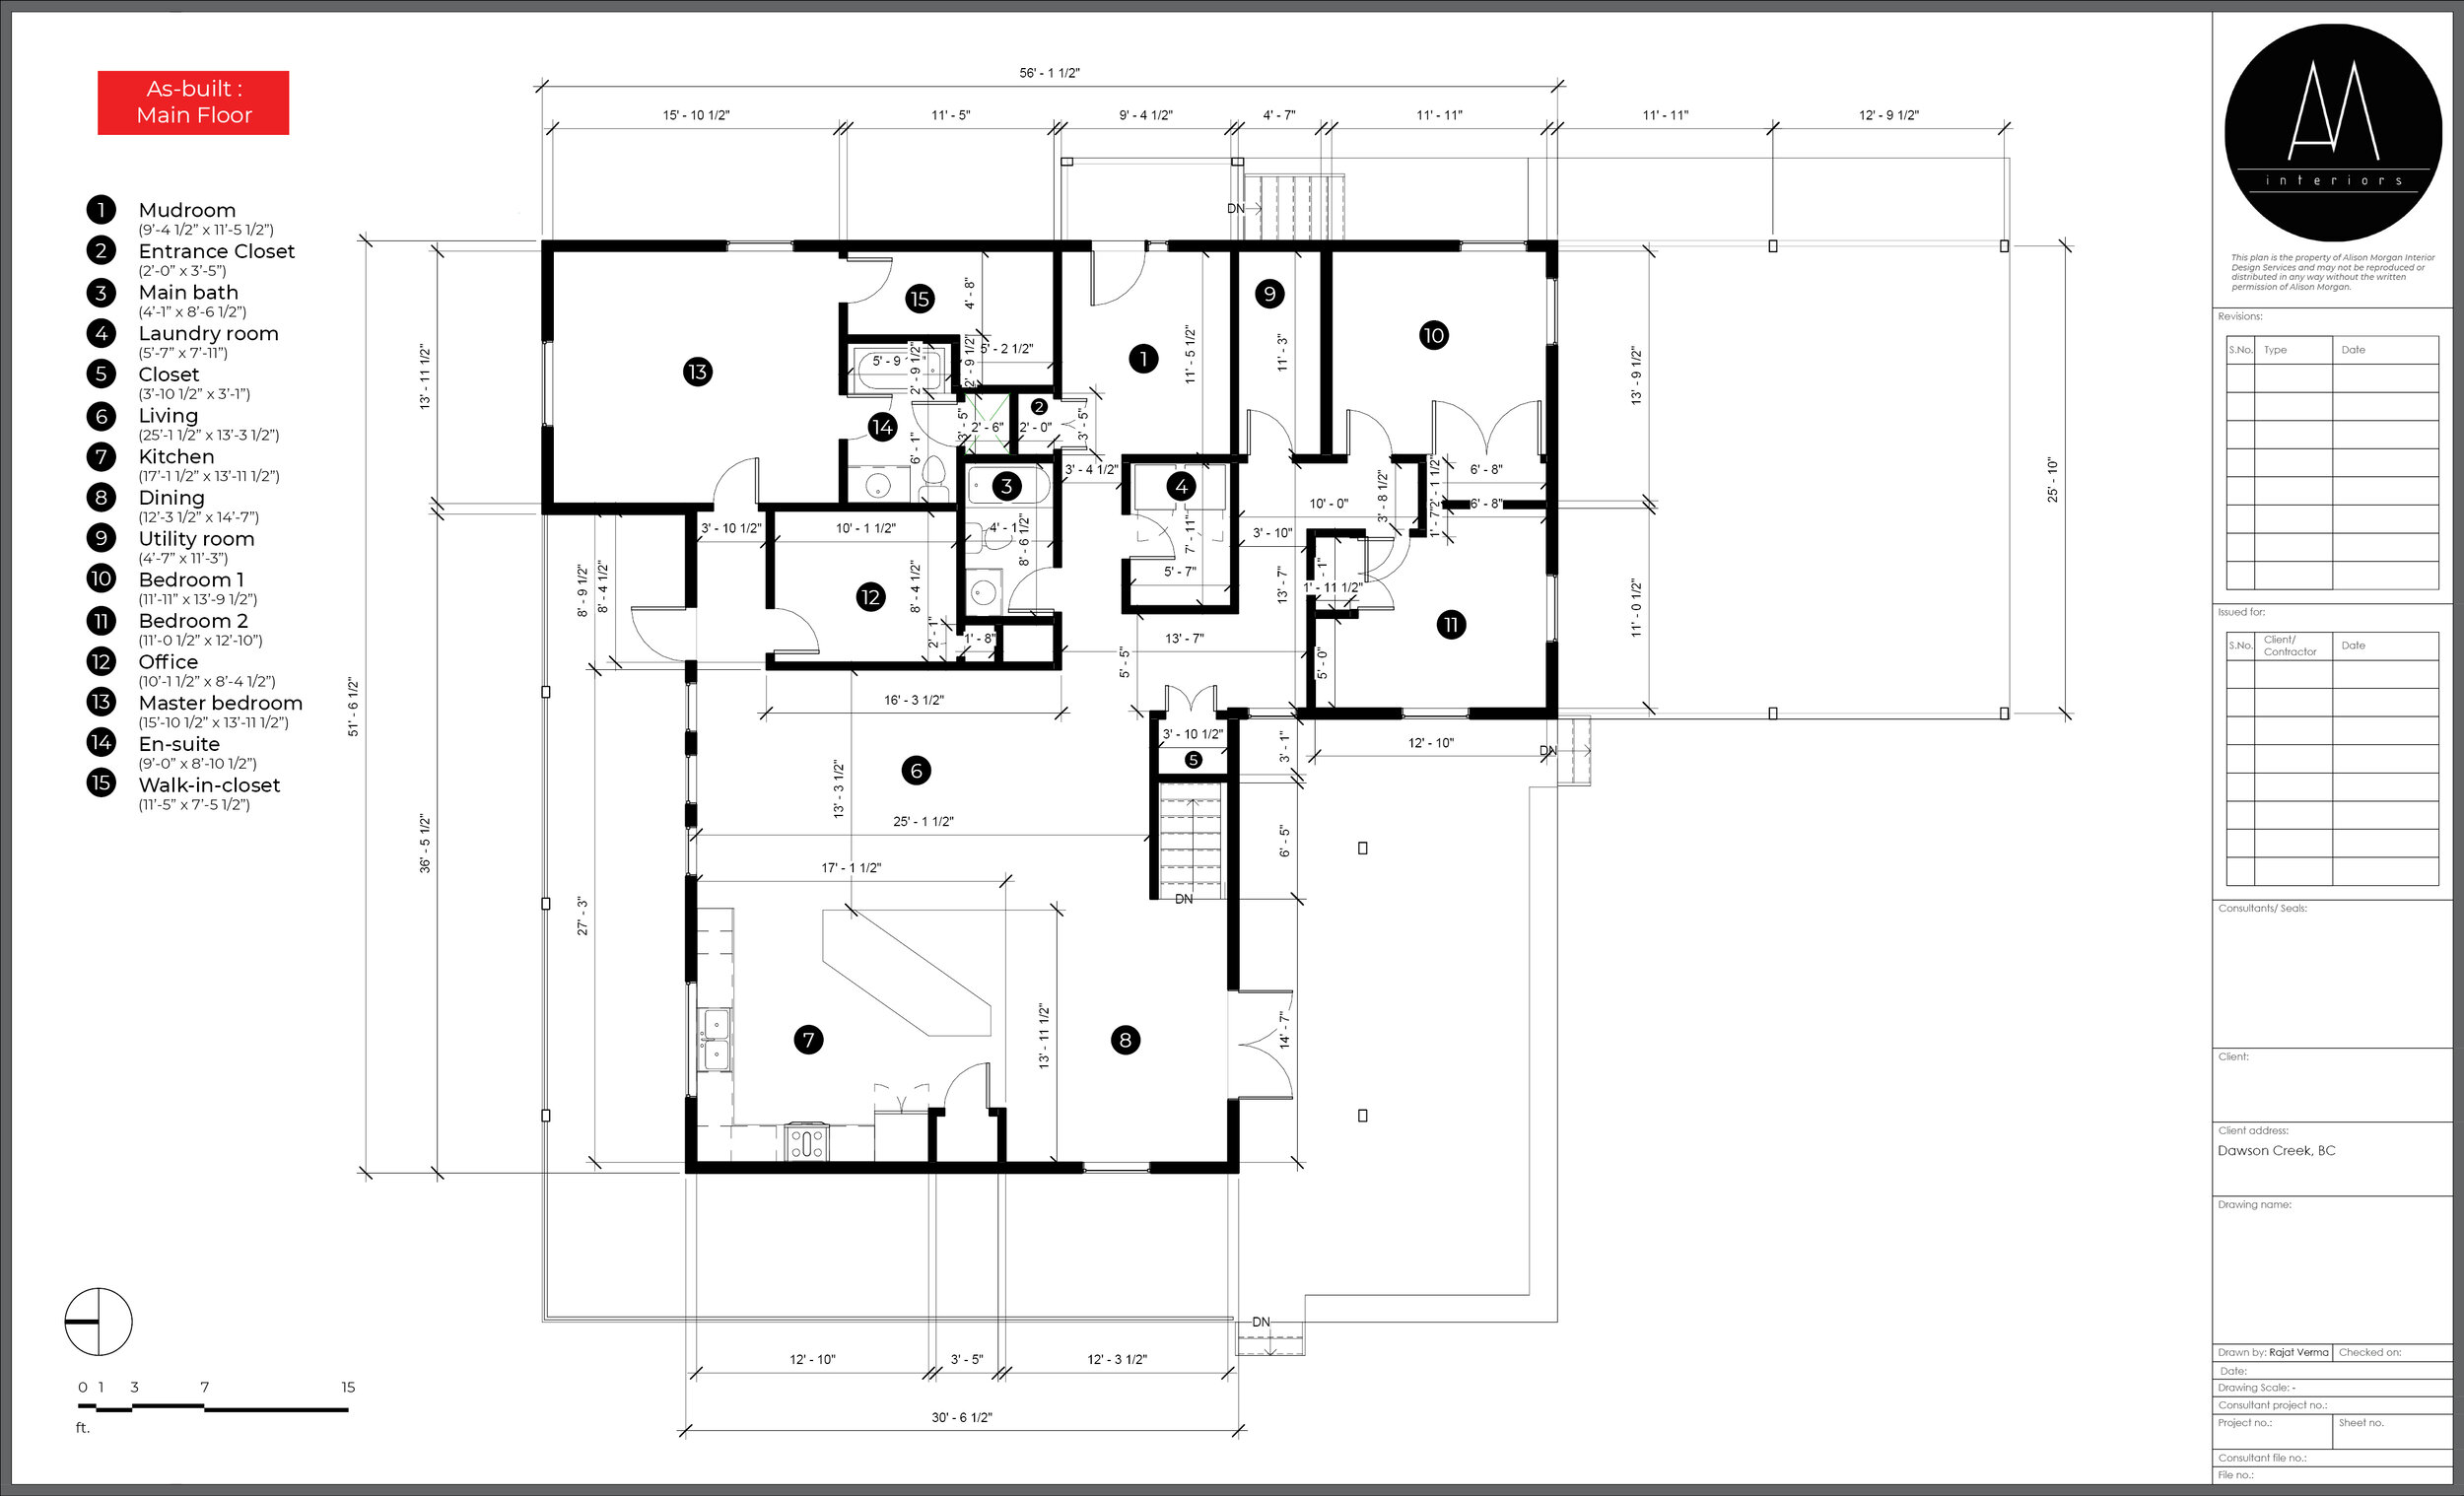 Kevin's residence_Plans_14th July, 20213.jpg